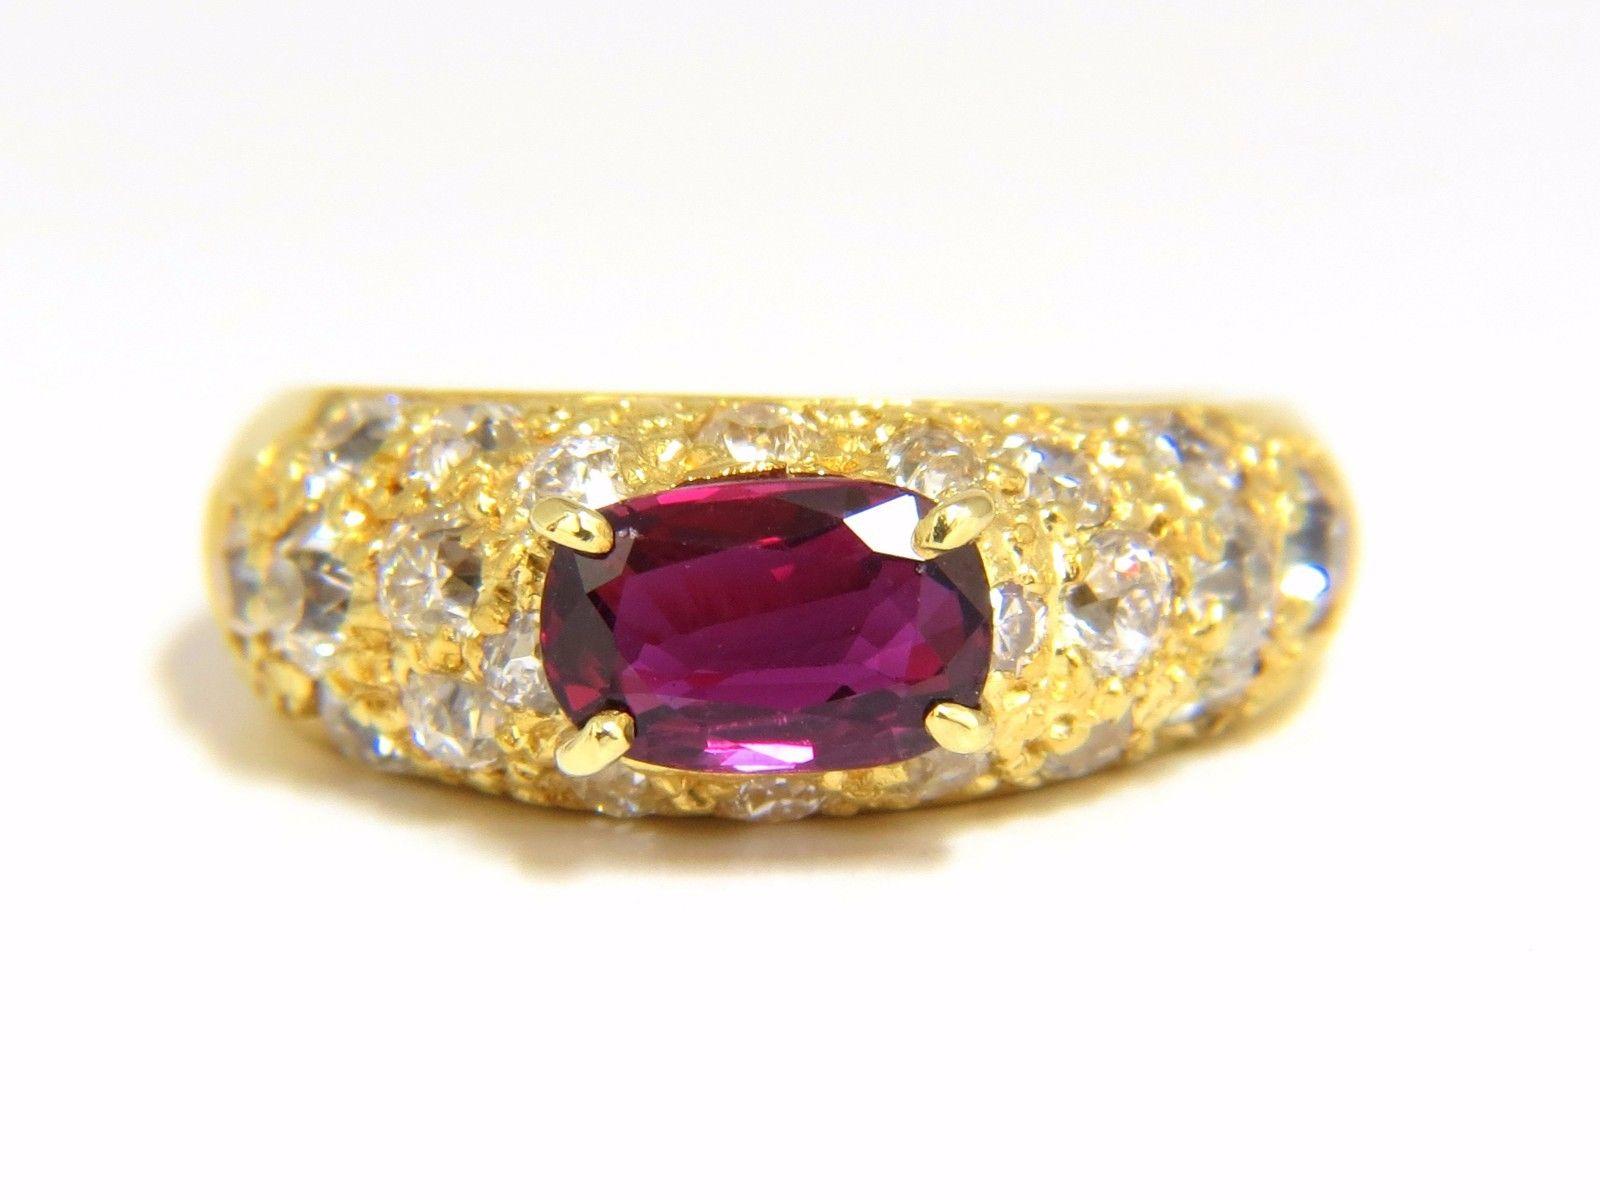 1.14ct. Natural Ruby Ring

8.9 X 5.0mm

Full cut oval brilliant 

Clean Clarity & Transparent

Vivid Purple Red



1.50ct. round Shaped diamonds.

H-color Si-2

  18kt. yellow gold

4.8 grams

Ring Current size: 5.5

Ring is 7.3mm wide

Depth